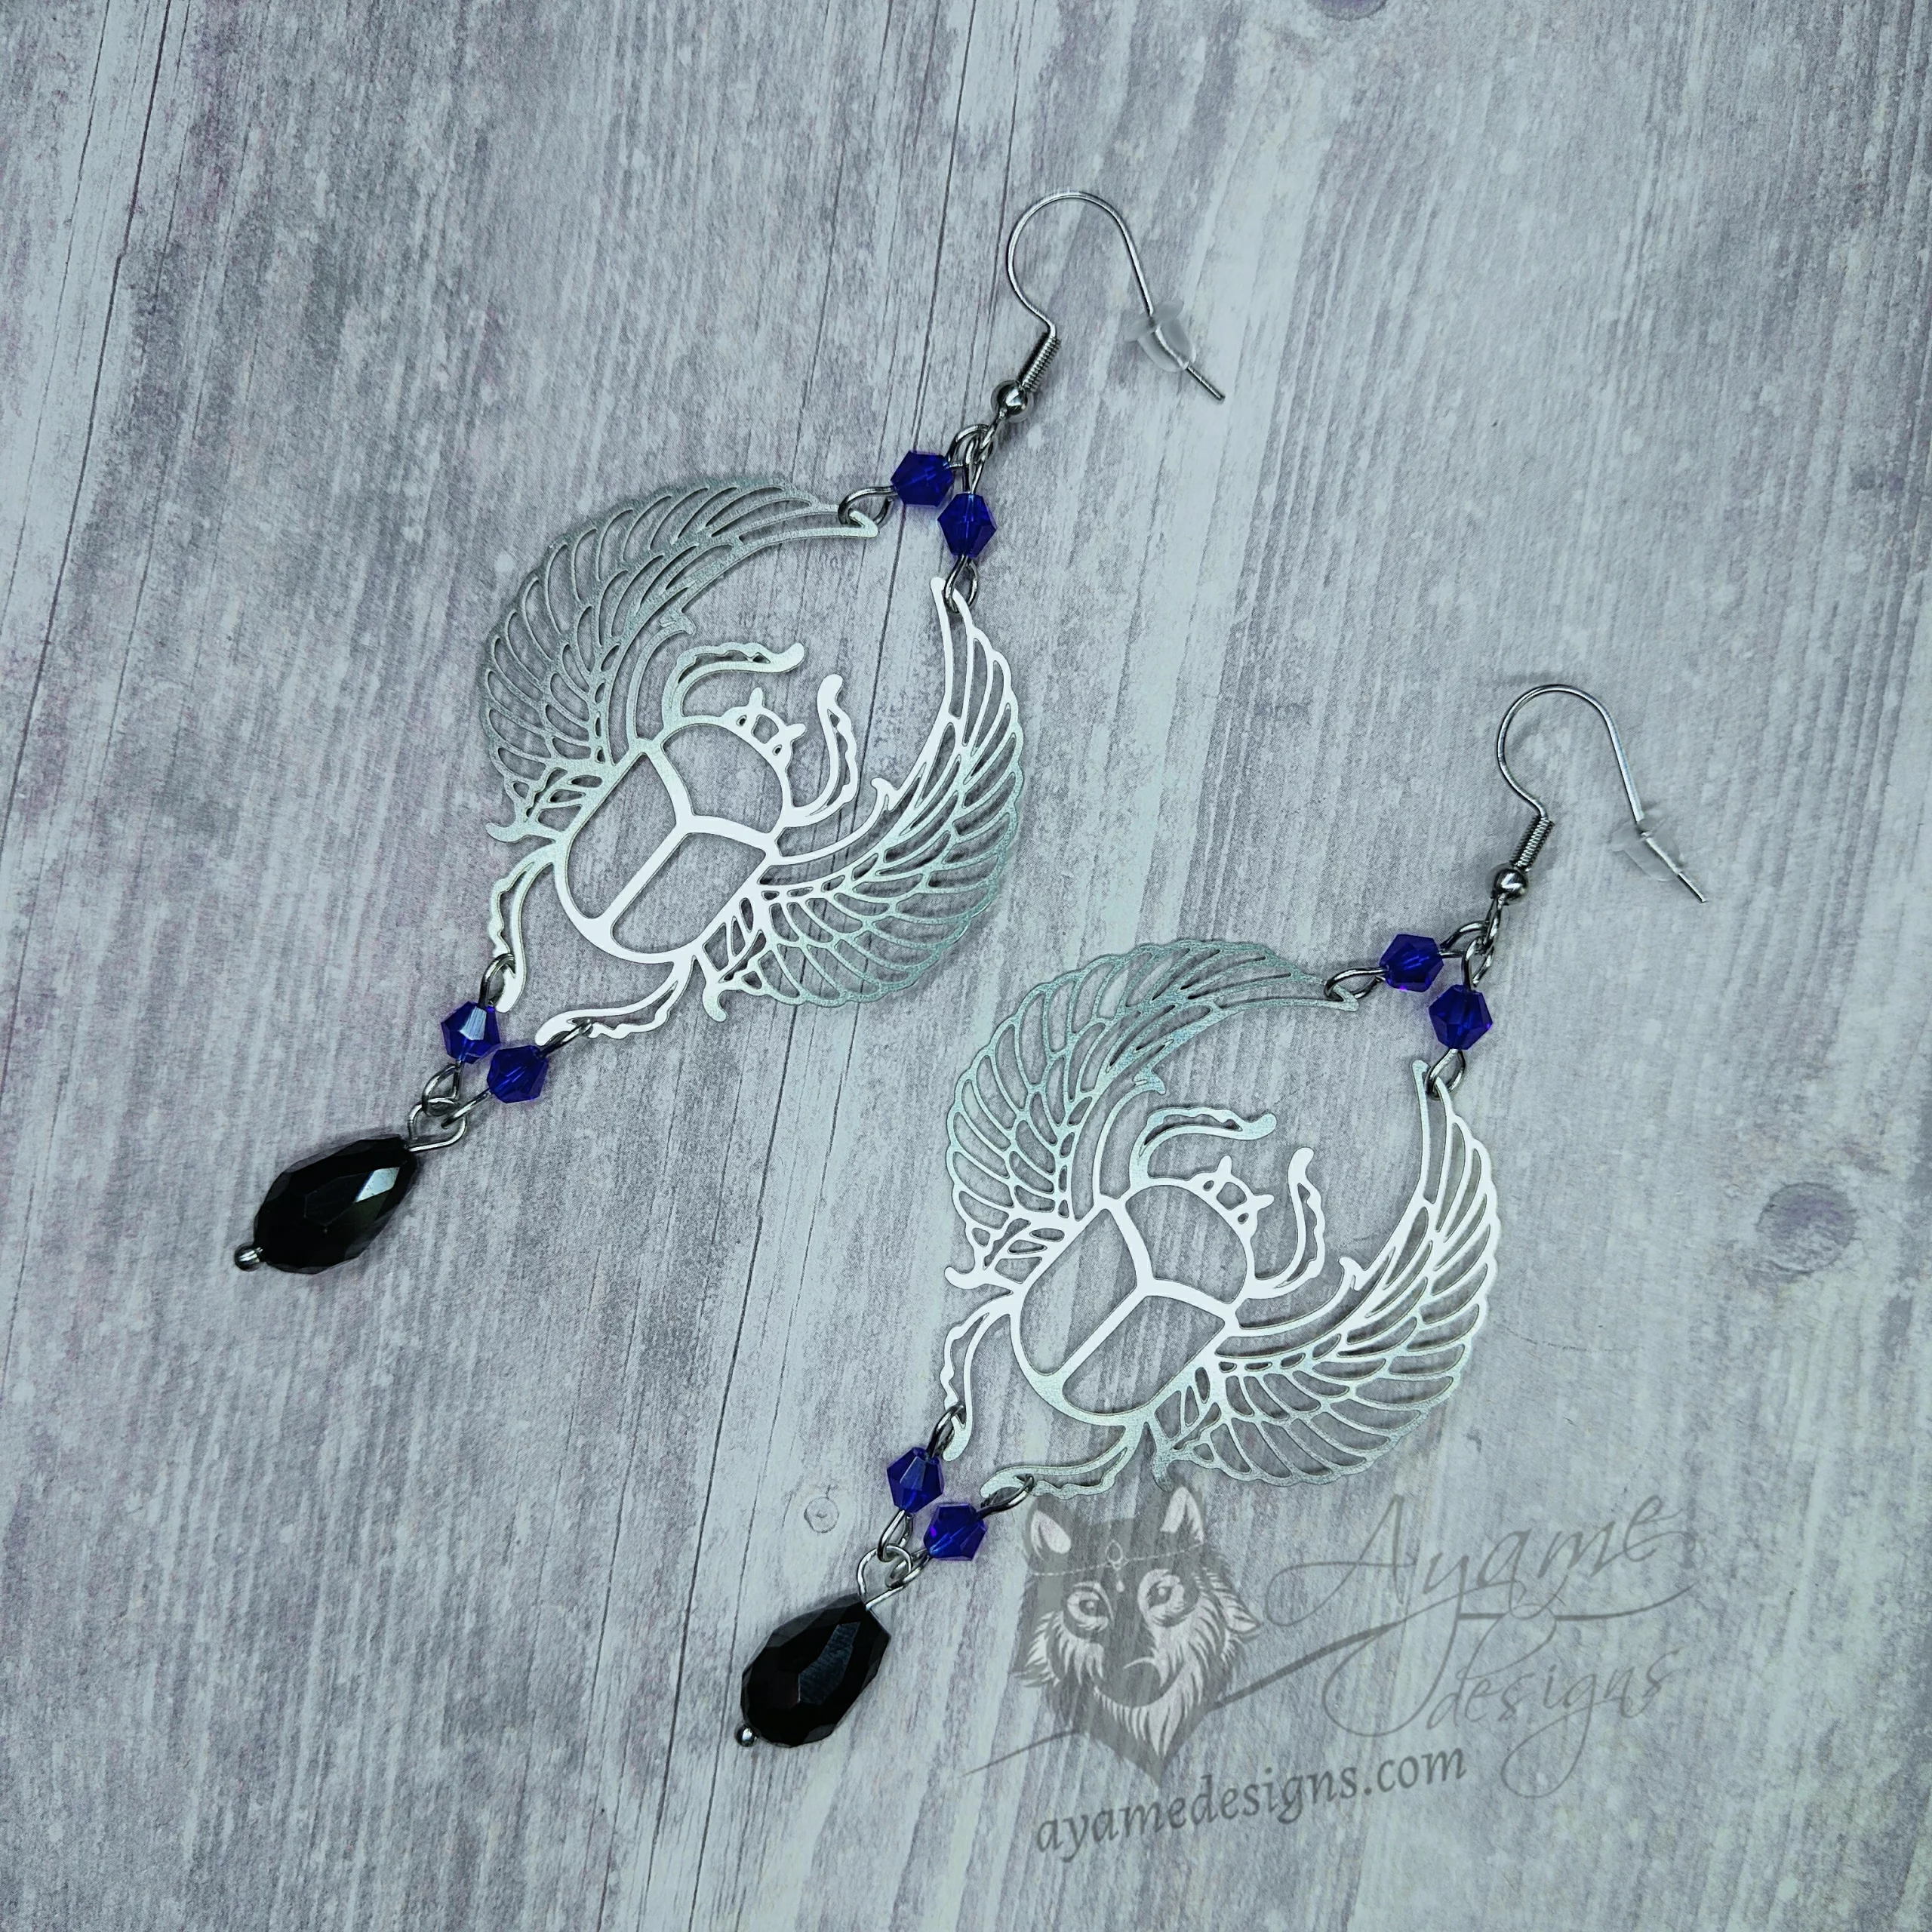 Handmade earrings with laser cut stainless steel scarab beetle charms with blue and black Austrian crystal beads, on stainless steel earring hooks